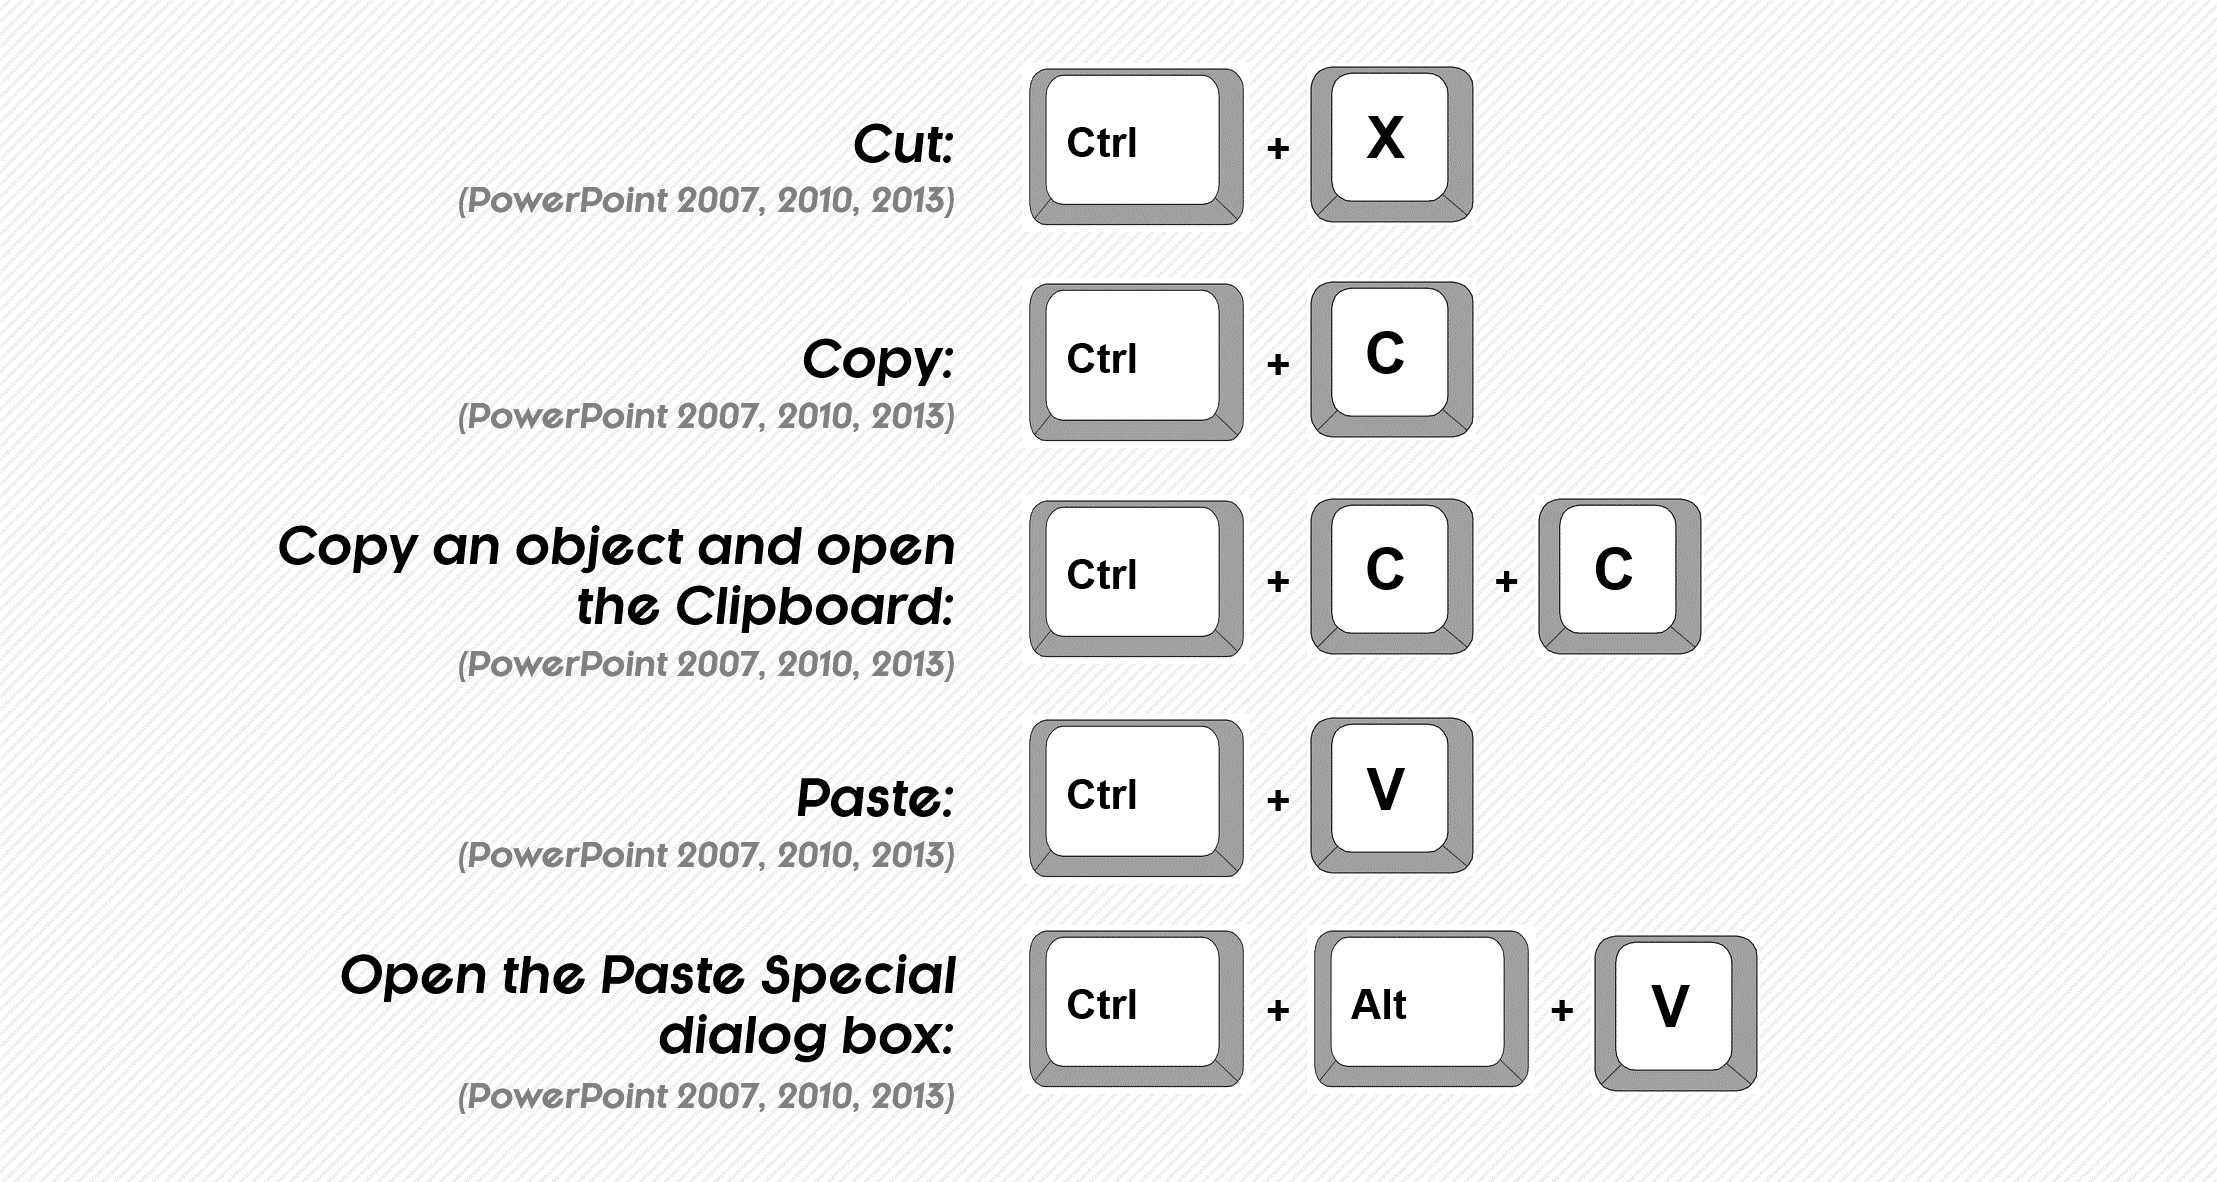 How To Cut And Paste From Pdf To Powerpoint